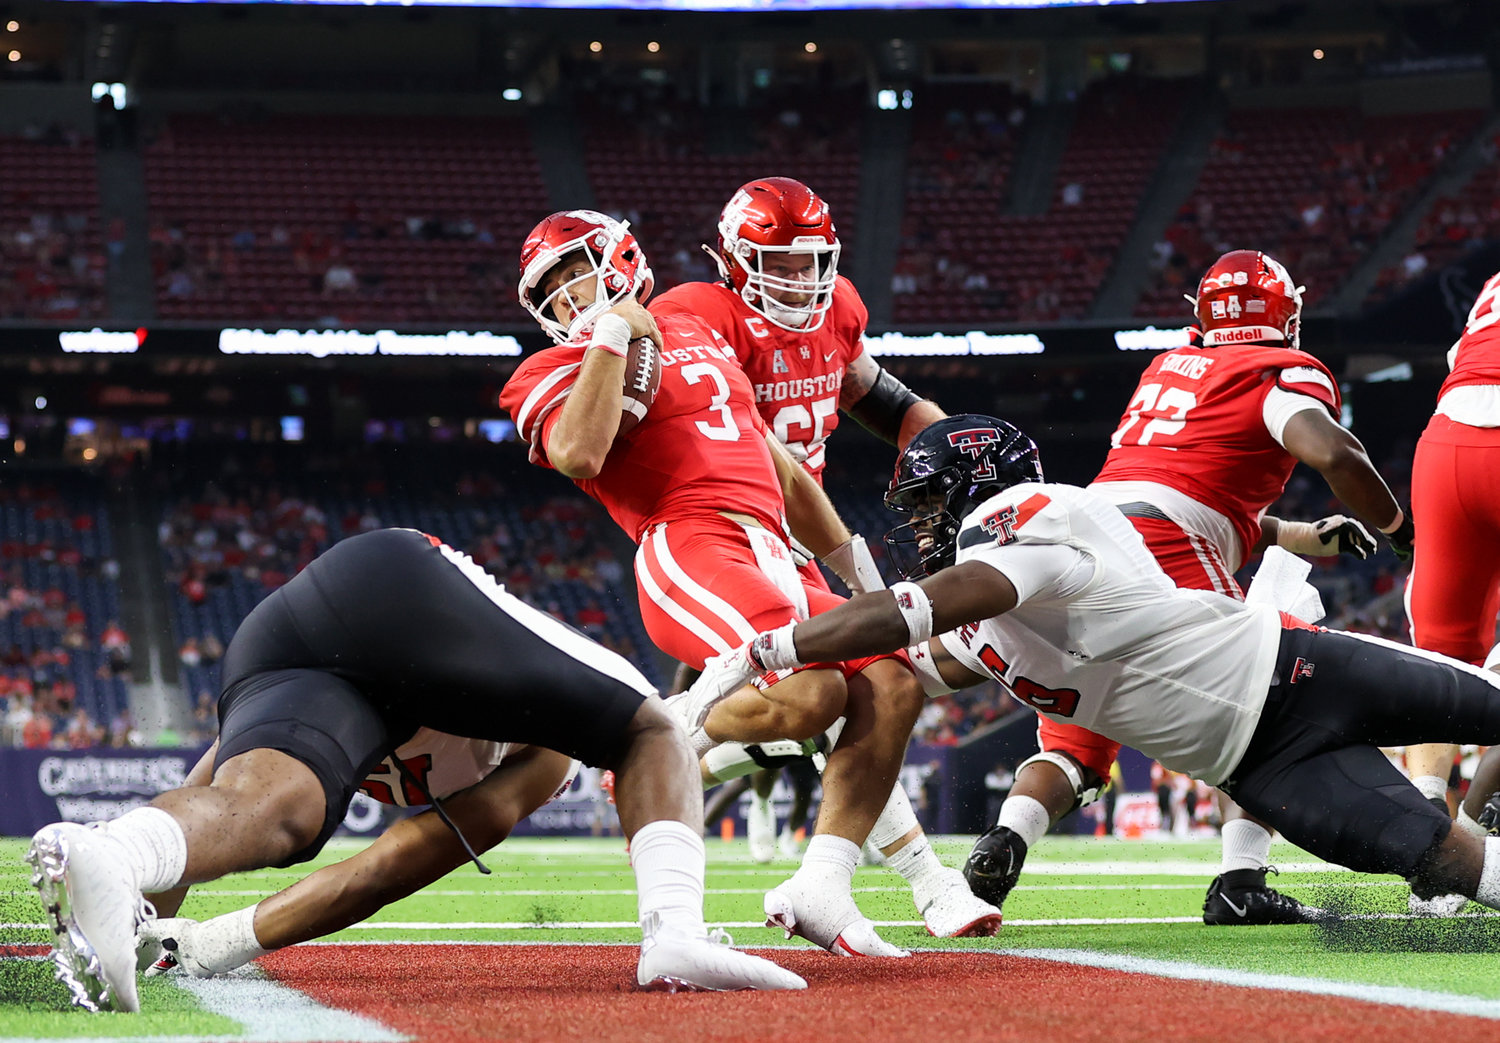 Houston Cougars quarterback Clayton Tune (3) escapes the grasp of Texas Tech Red Raiders linebacker Riko Jeffers (6) in the end zone to avoid a safety during an NCAA football game between Houston and Texas Tech on September 4, 2021 in Houston, Texas.